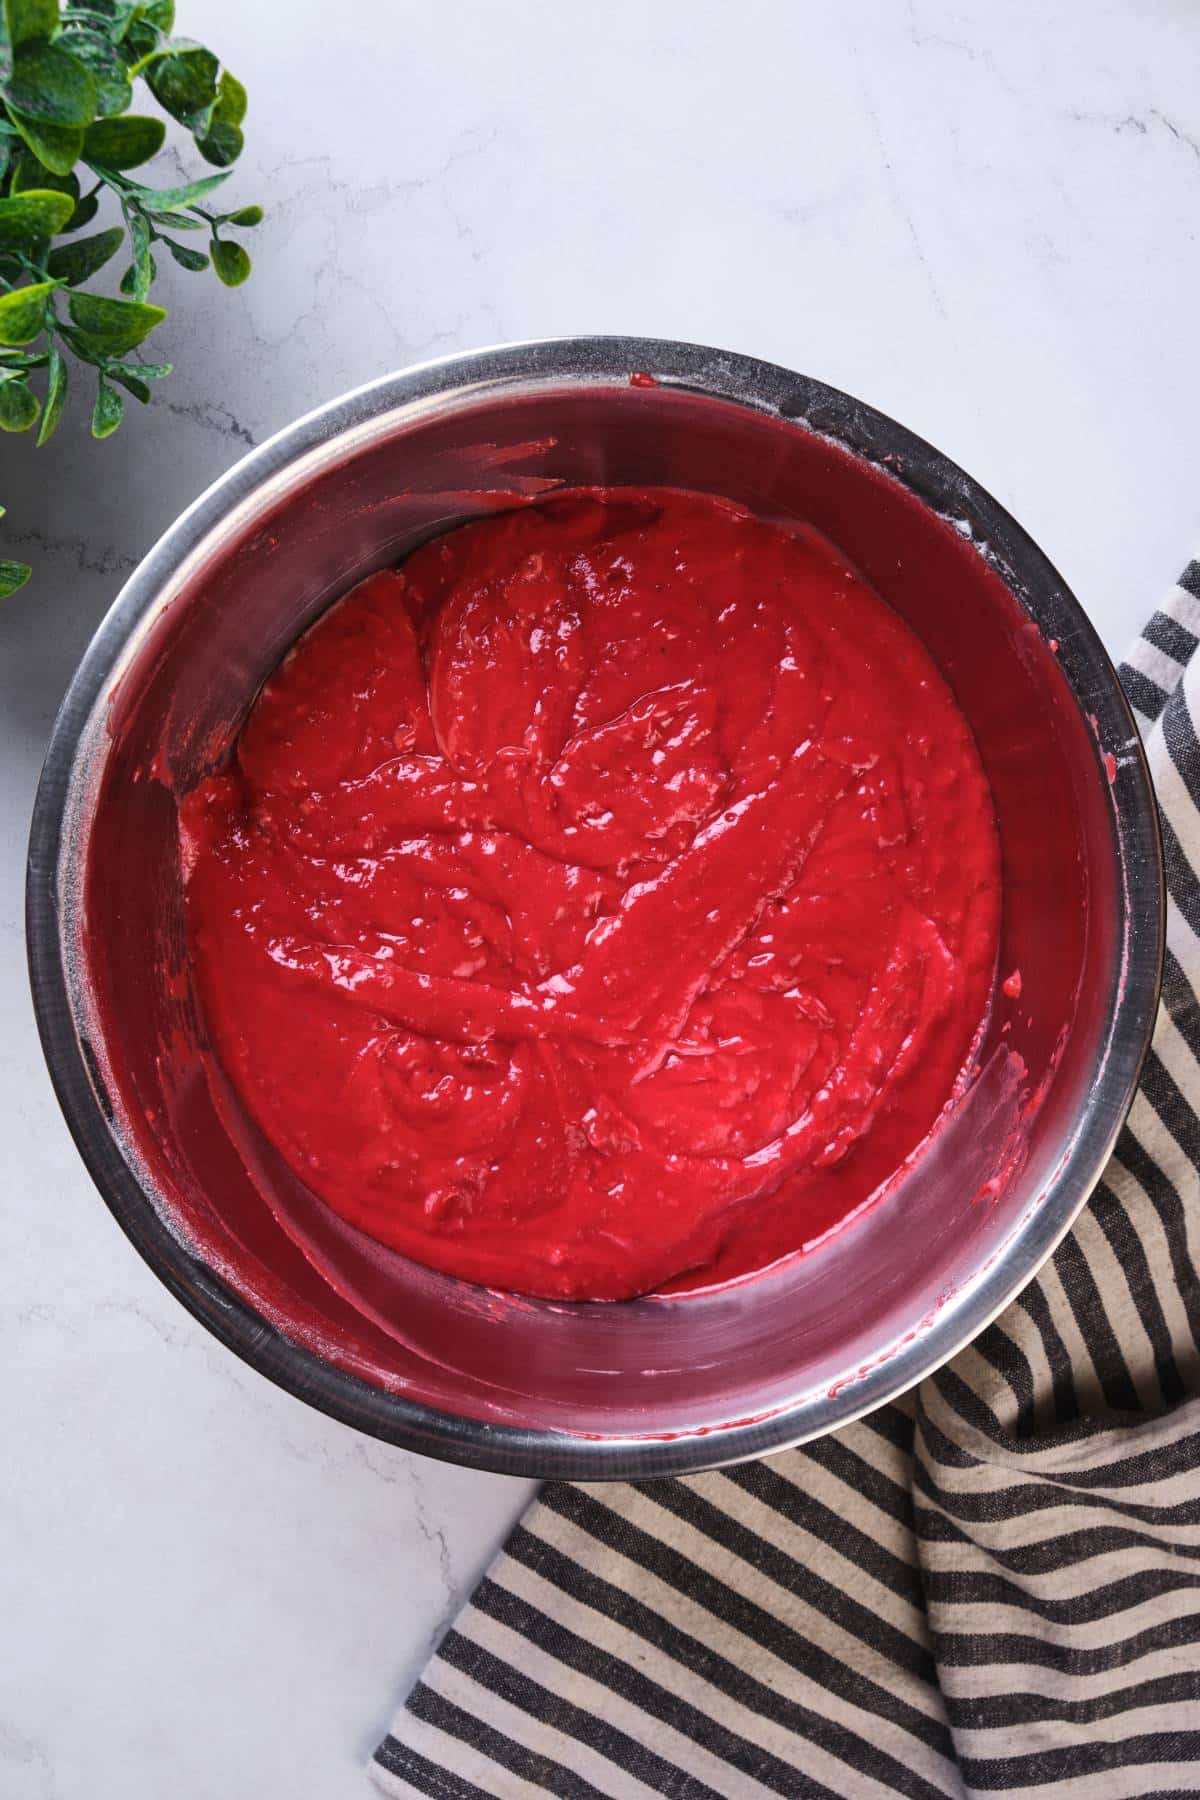 The prepared strawberry cake batter in a bowl.